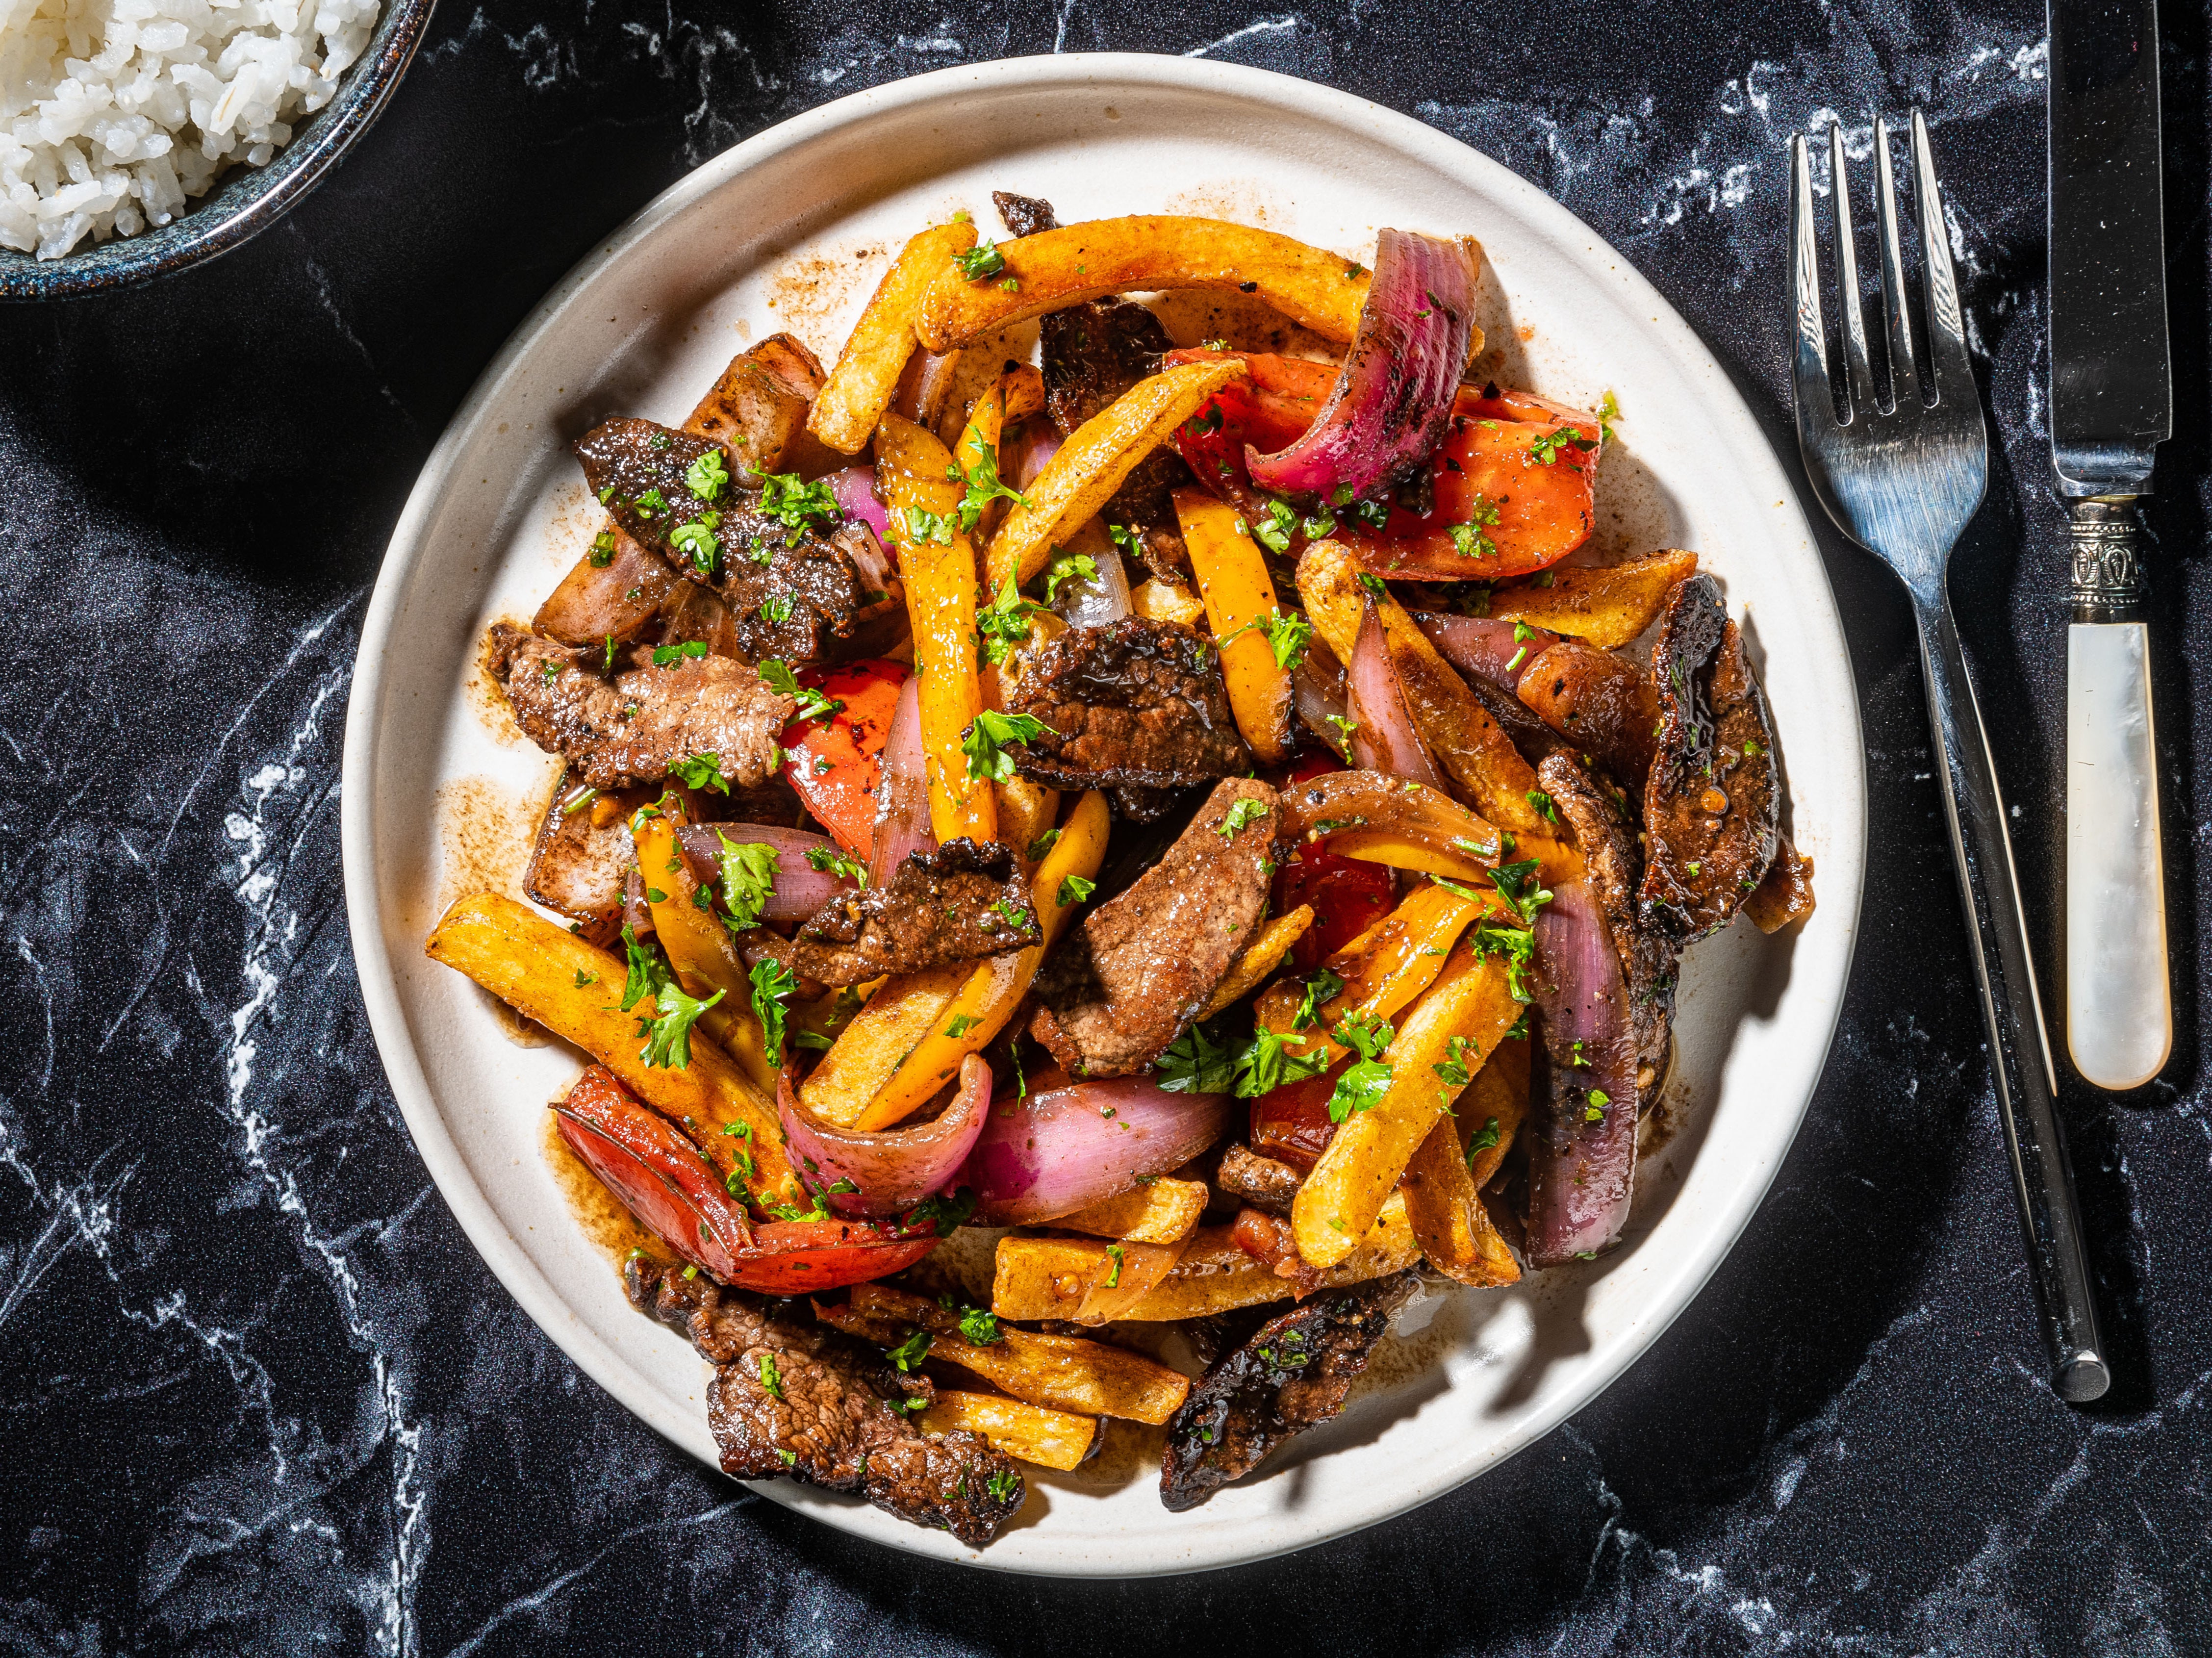 Classic lomo saltado is a literal translation of its Spanish name: a beef stir-fry